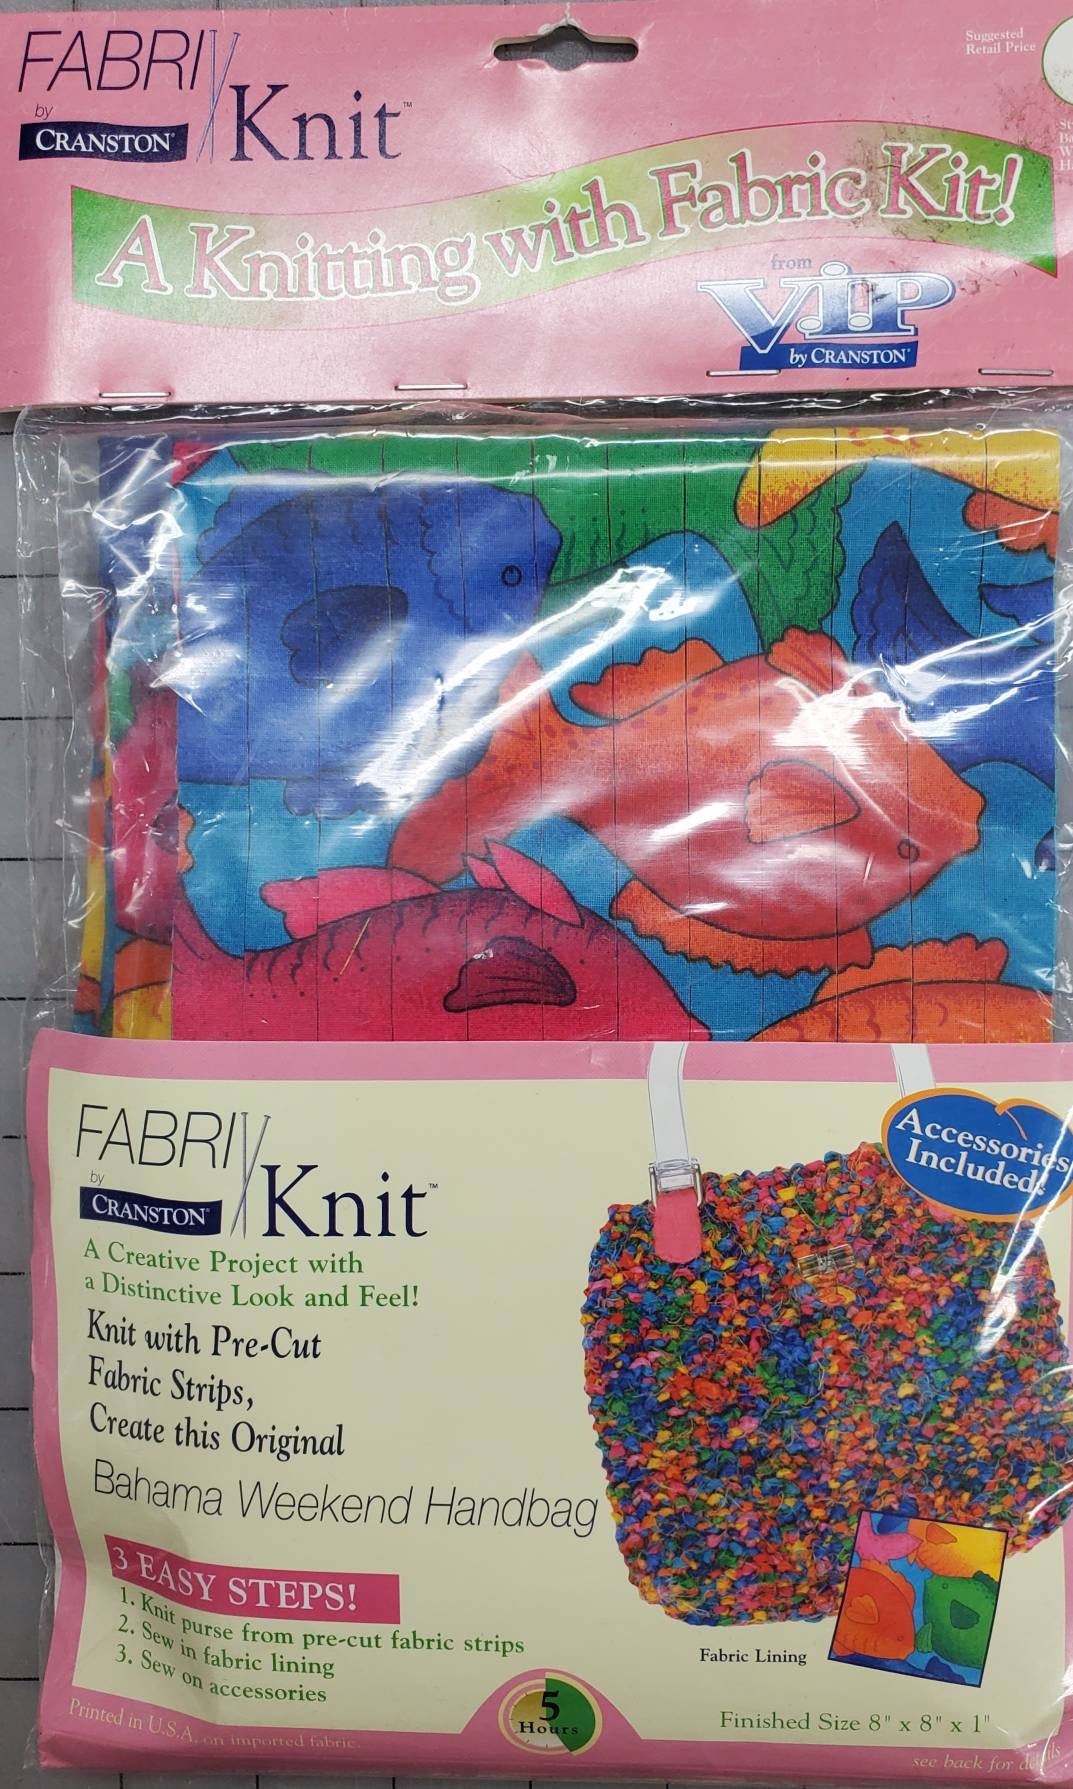 Knitting with fabric strips